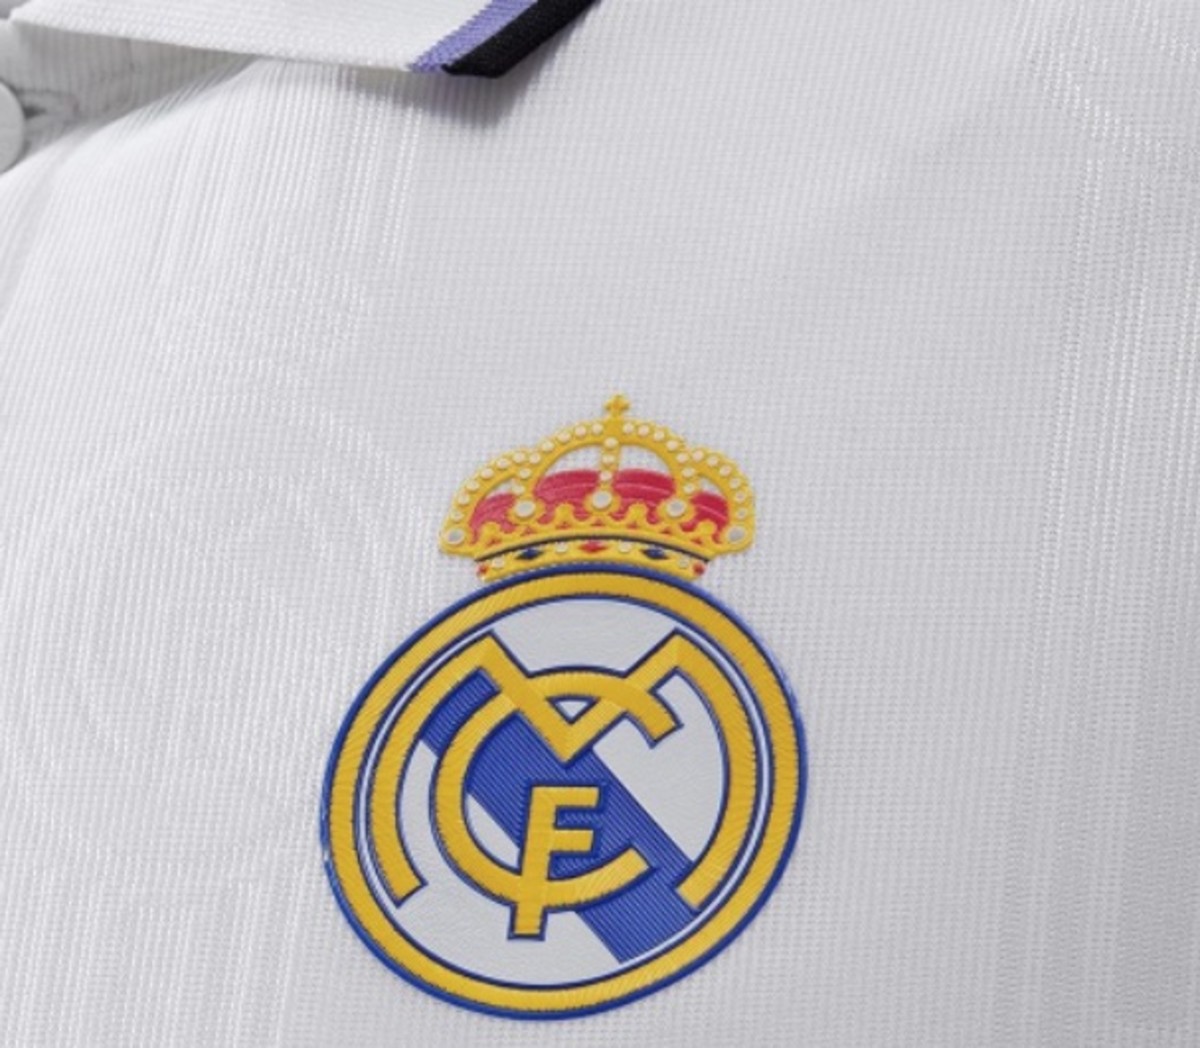 A close-up view of the club crest on Real Madrid's new home jersey for the 2022/23 season